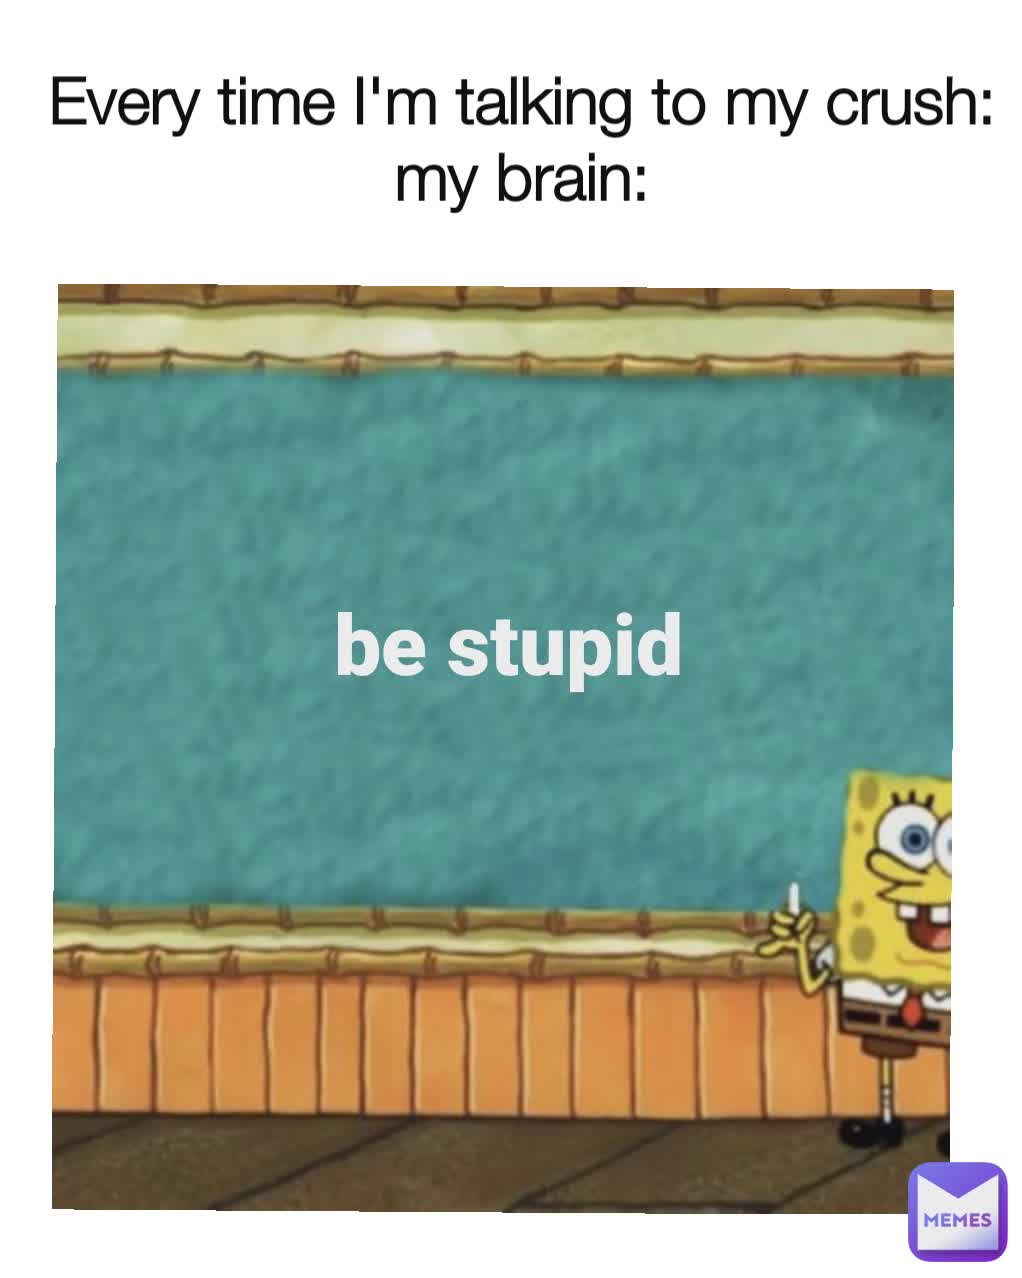 Every time I'm talking to my crush:
my brain: be stupid be stupid